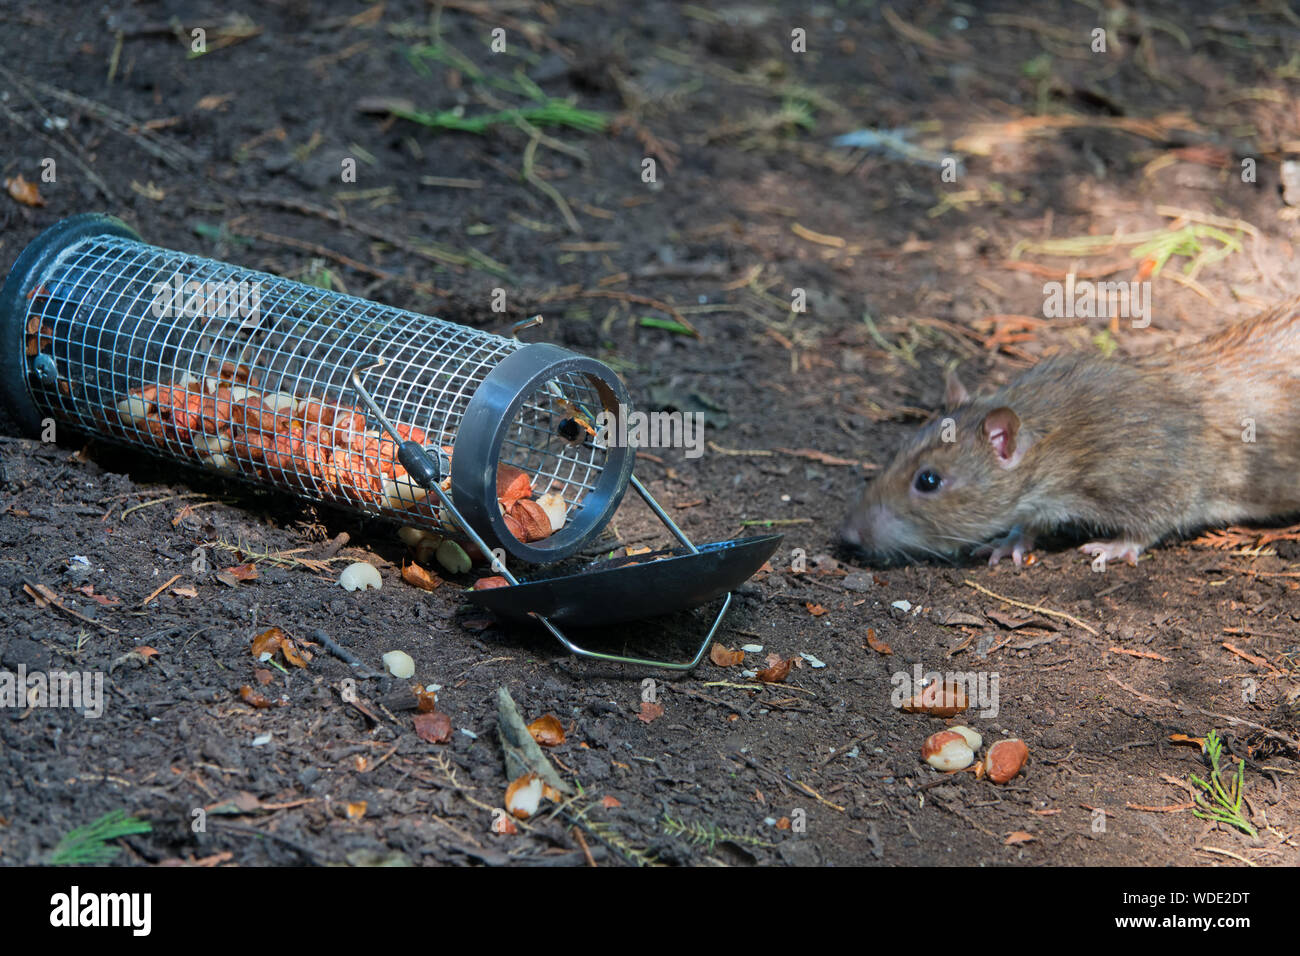 Rats eating nuts from a bird feeder that had dropped on the forest floor Stock Photo